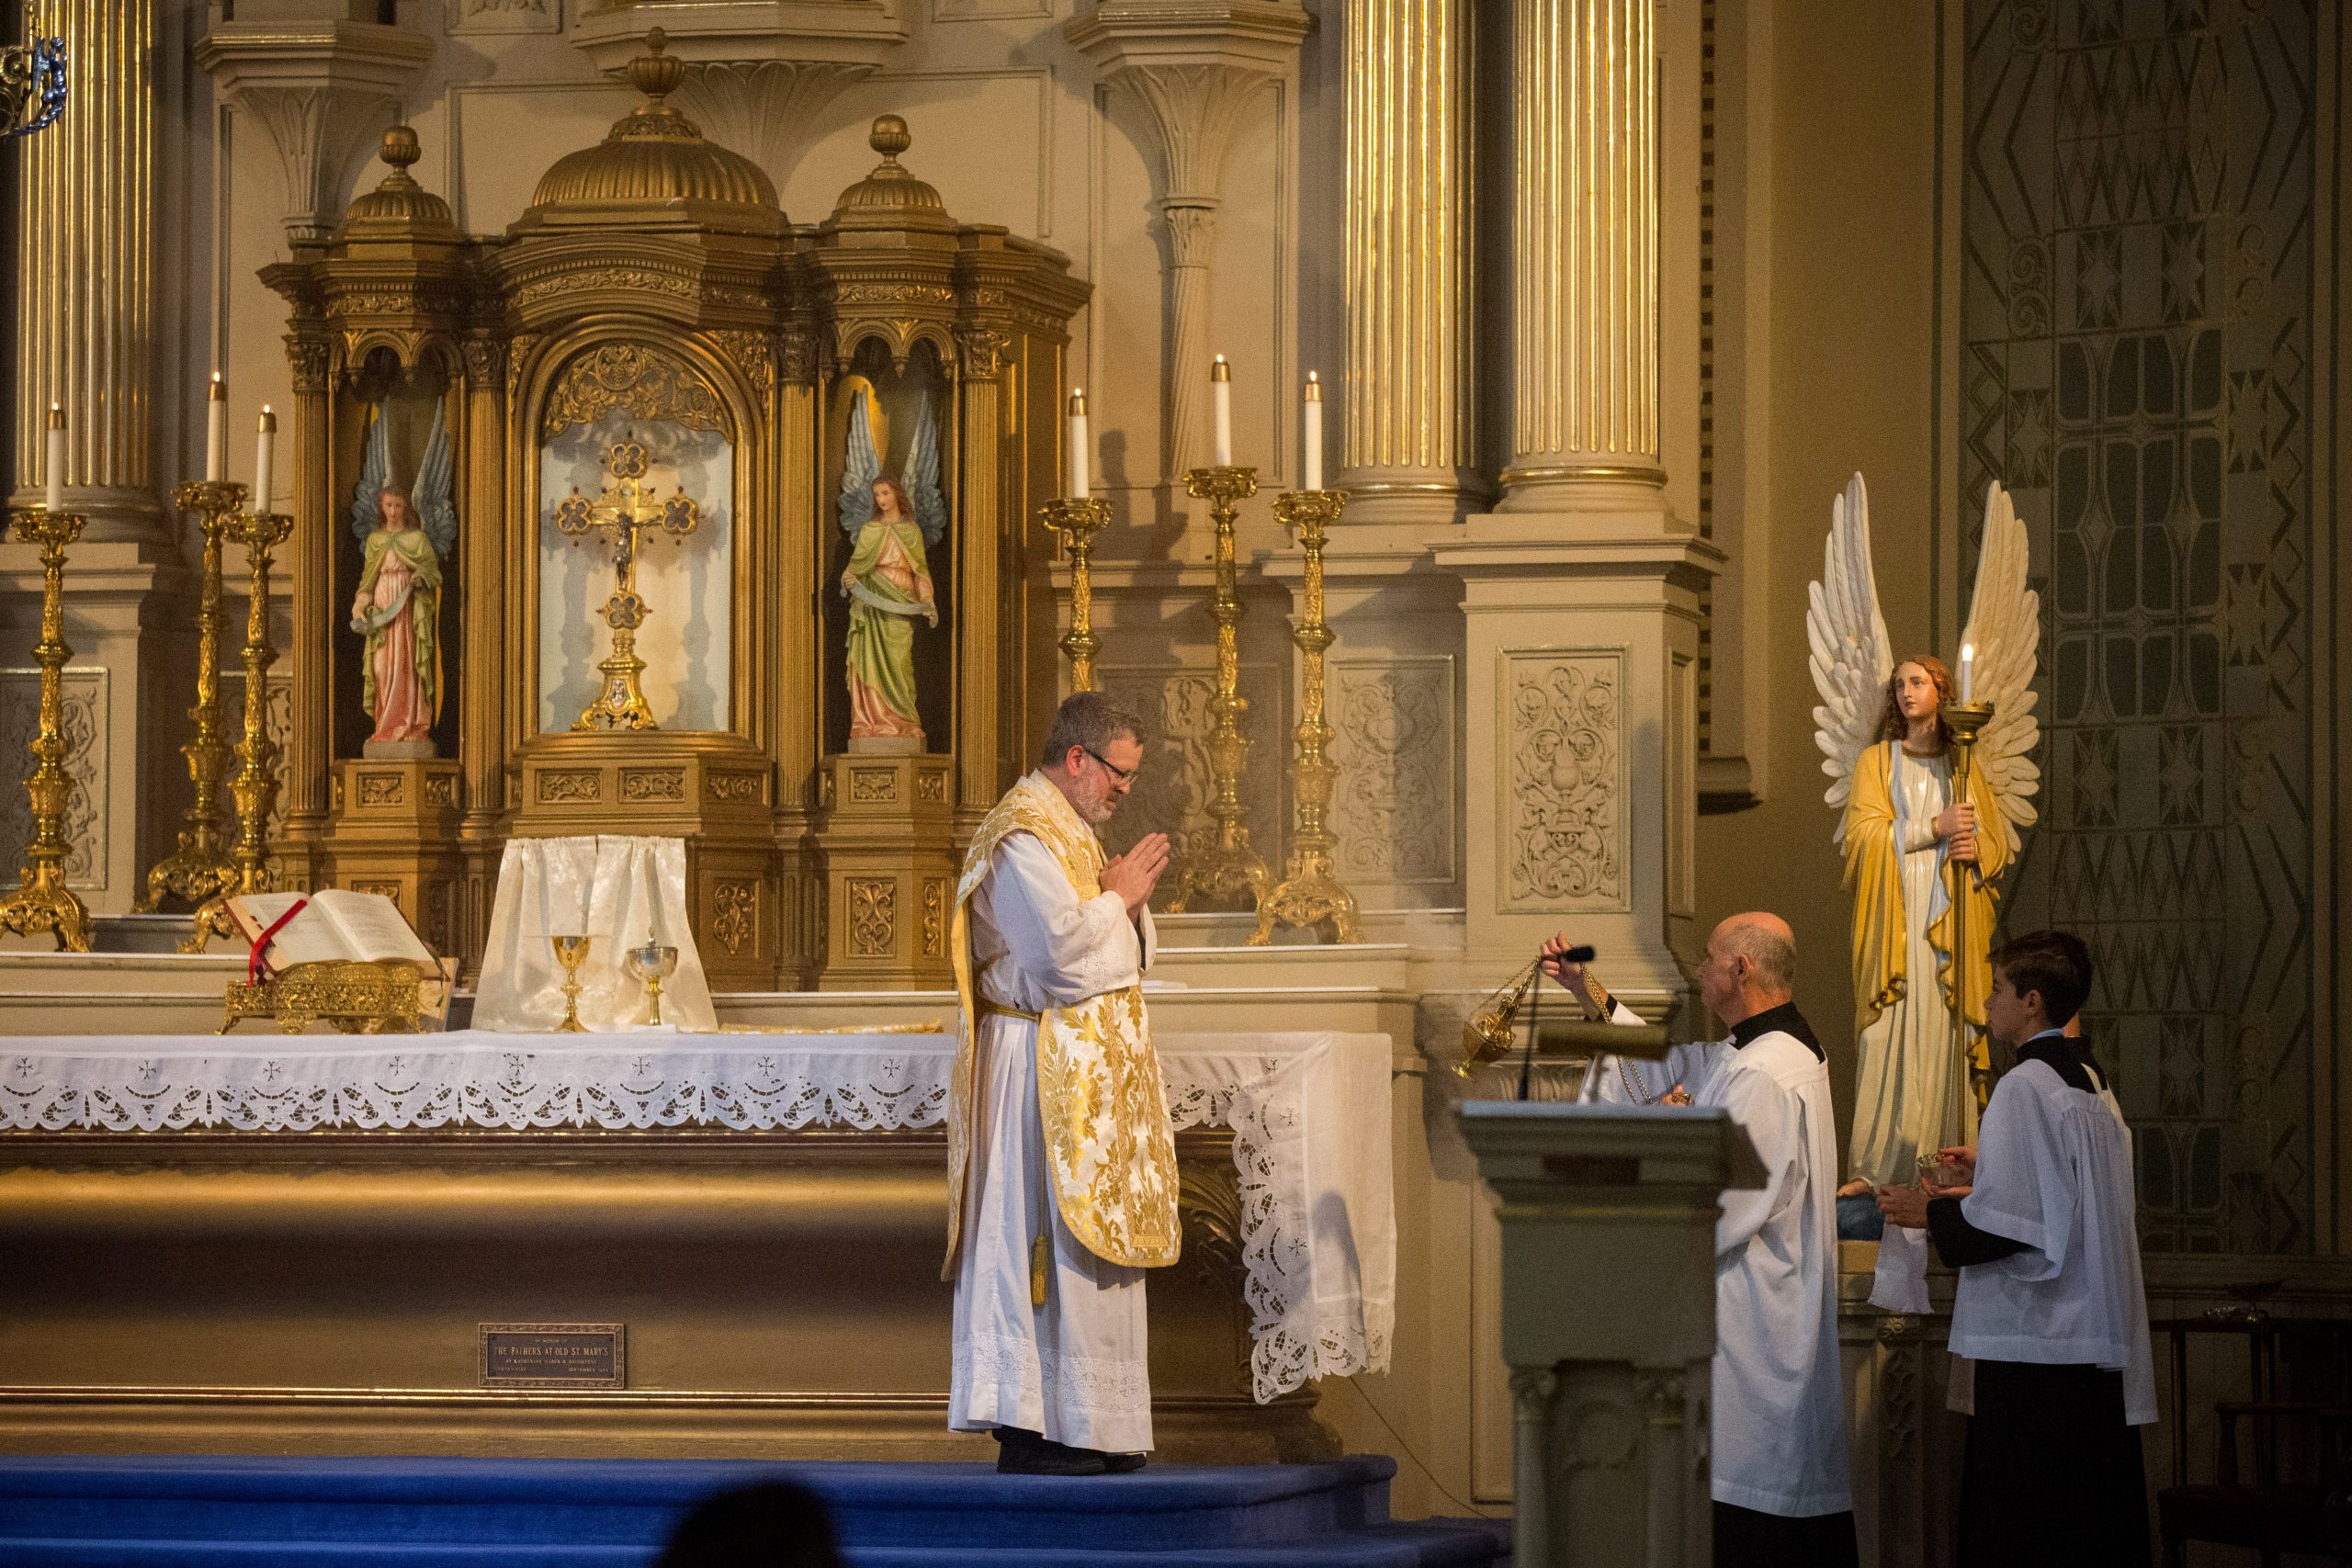 Beautiful High Mass at Old Saint Mary's in Detroit